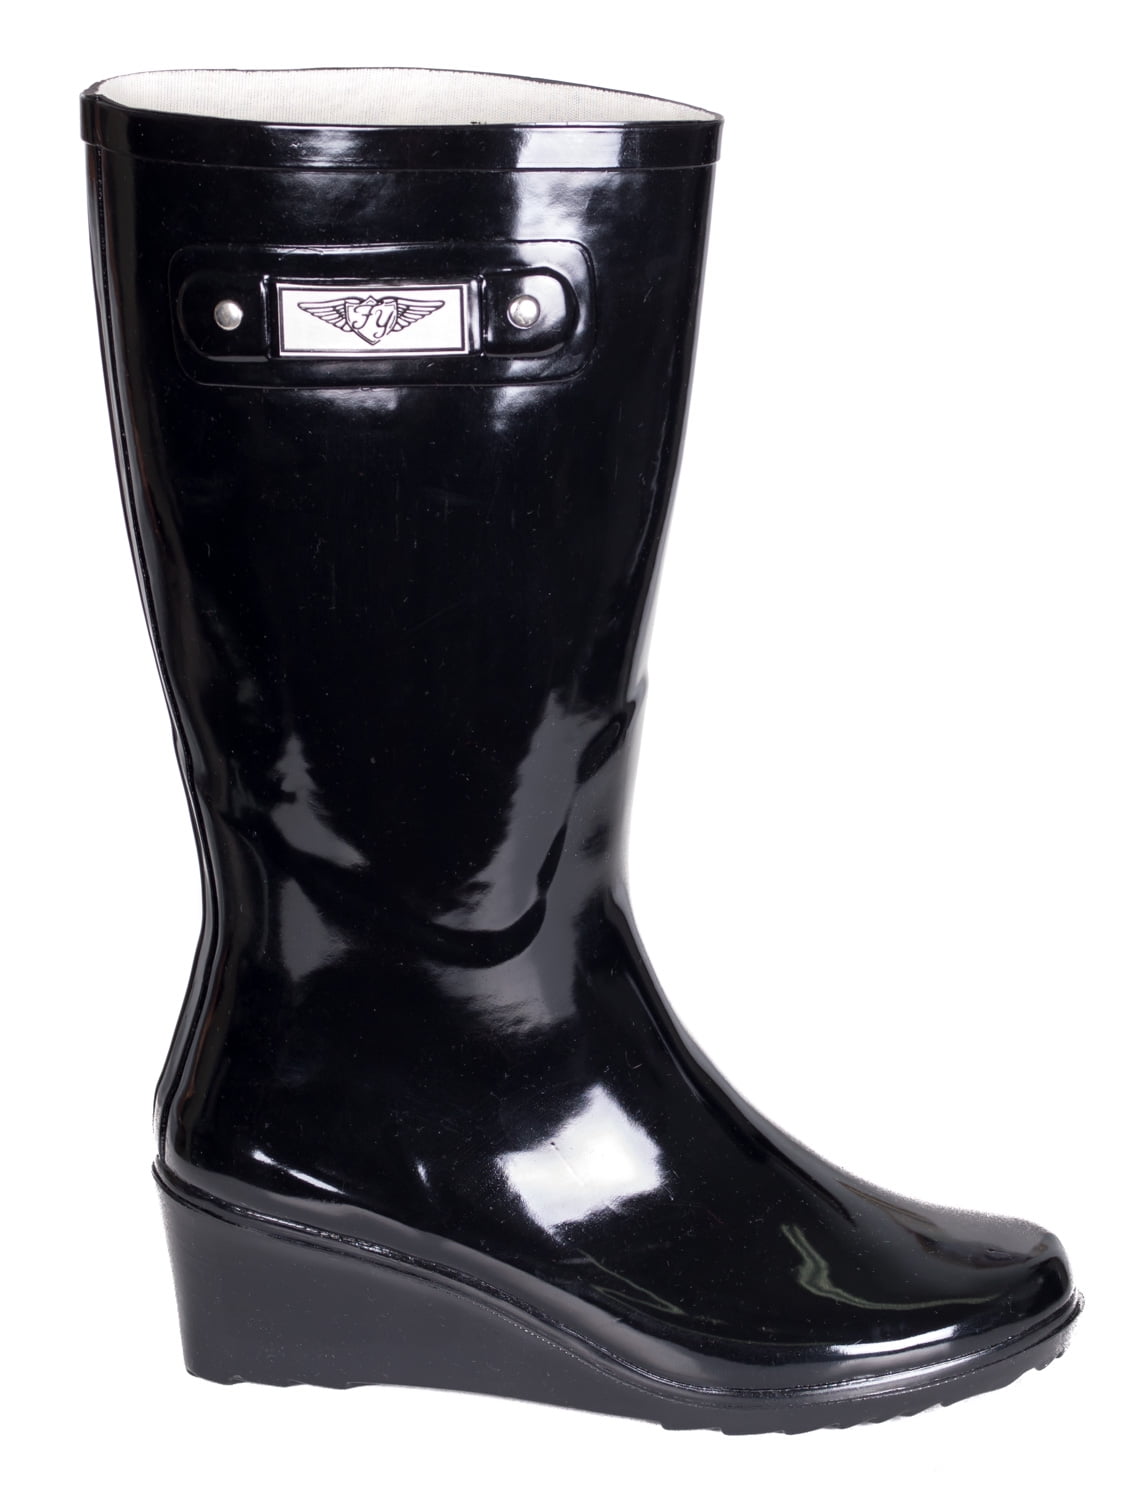 rain boots with wedge